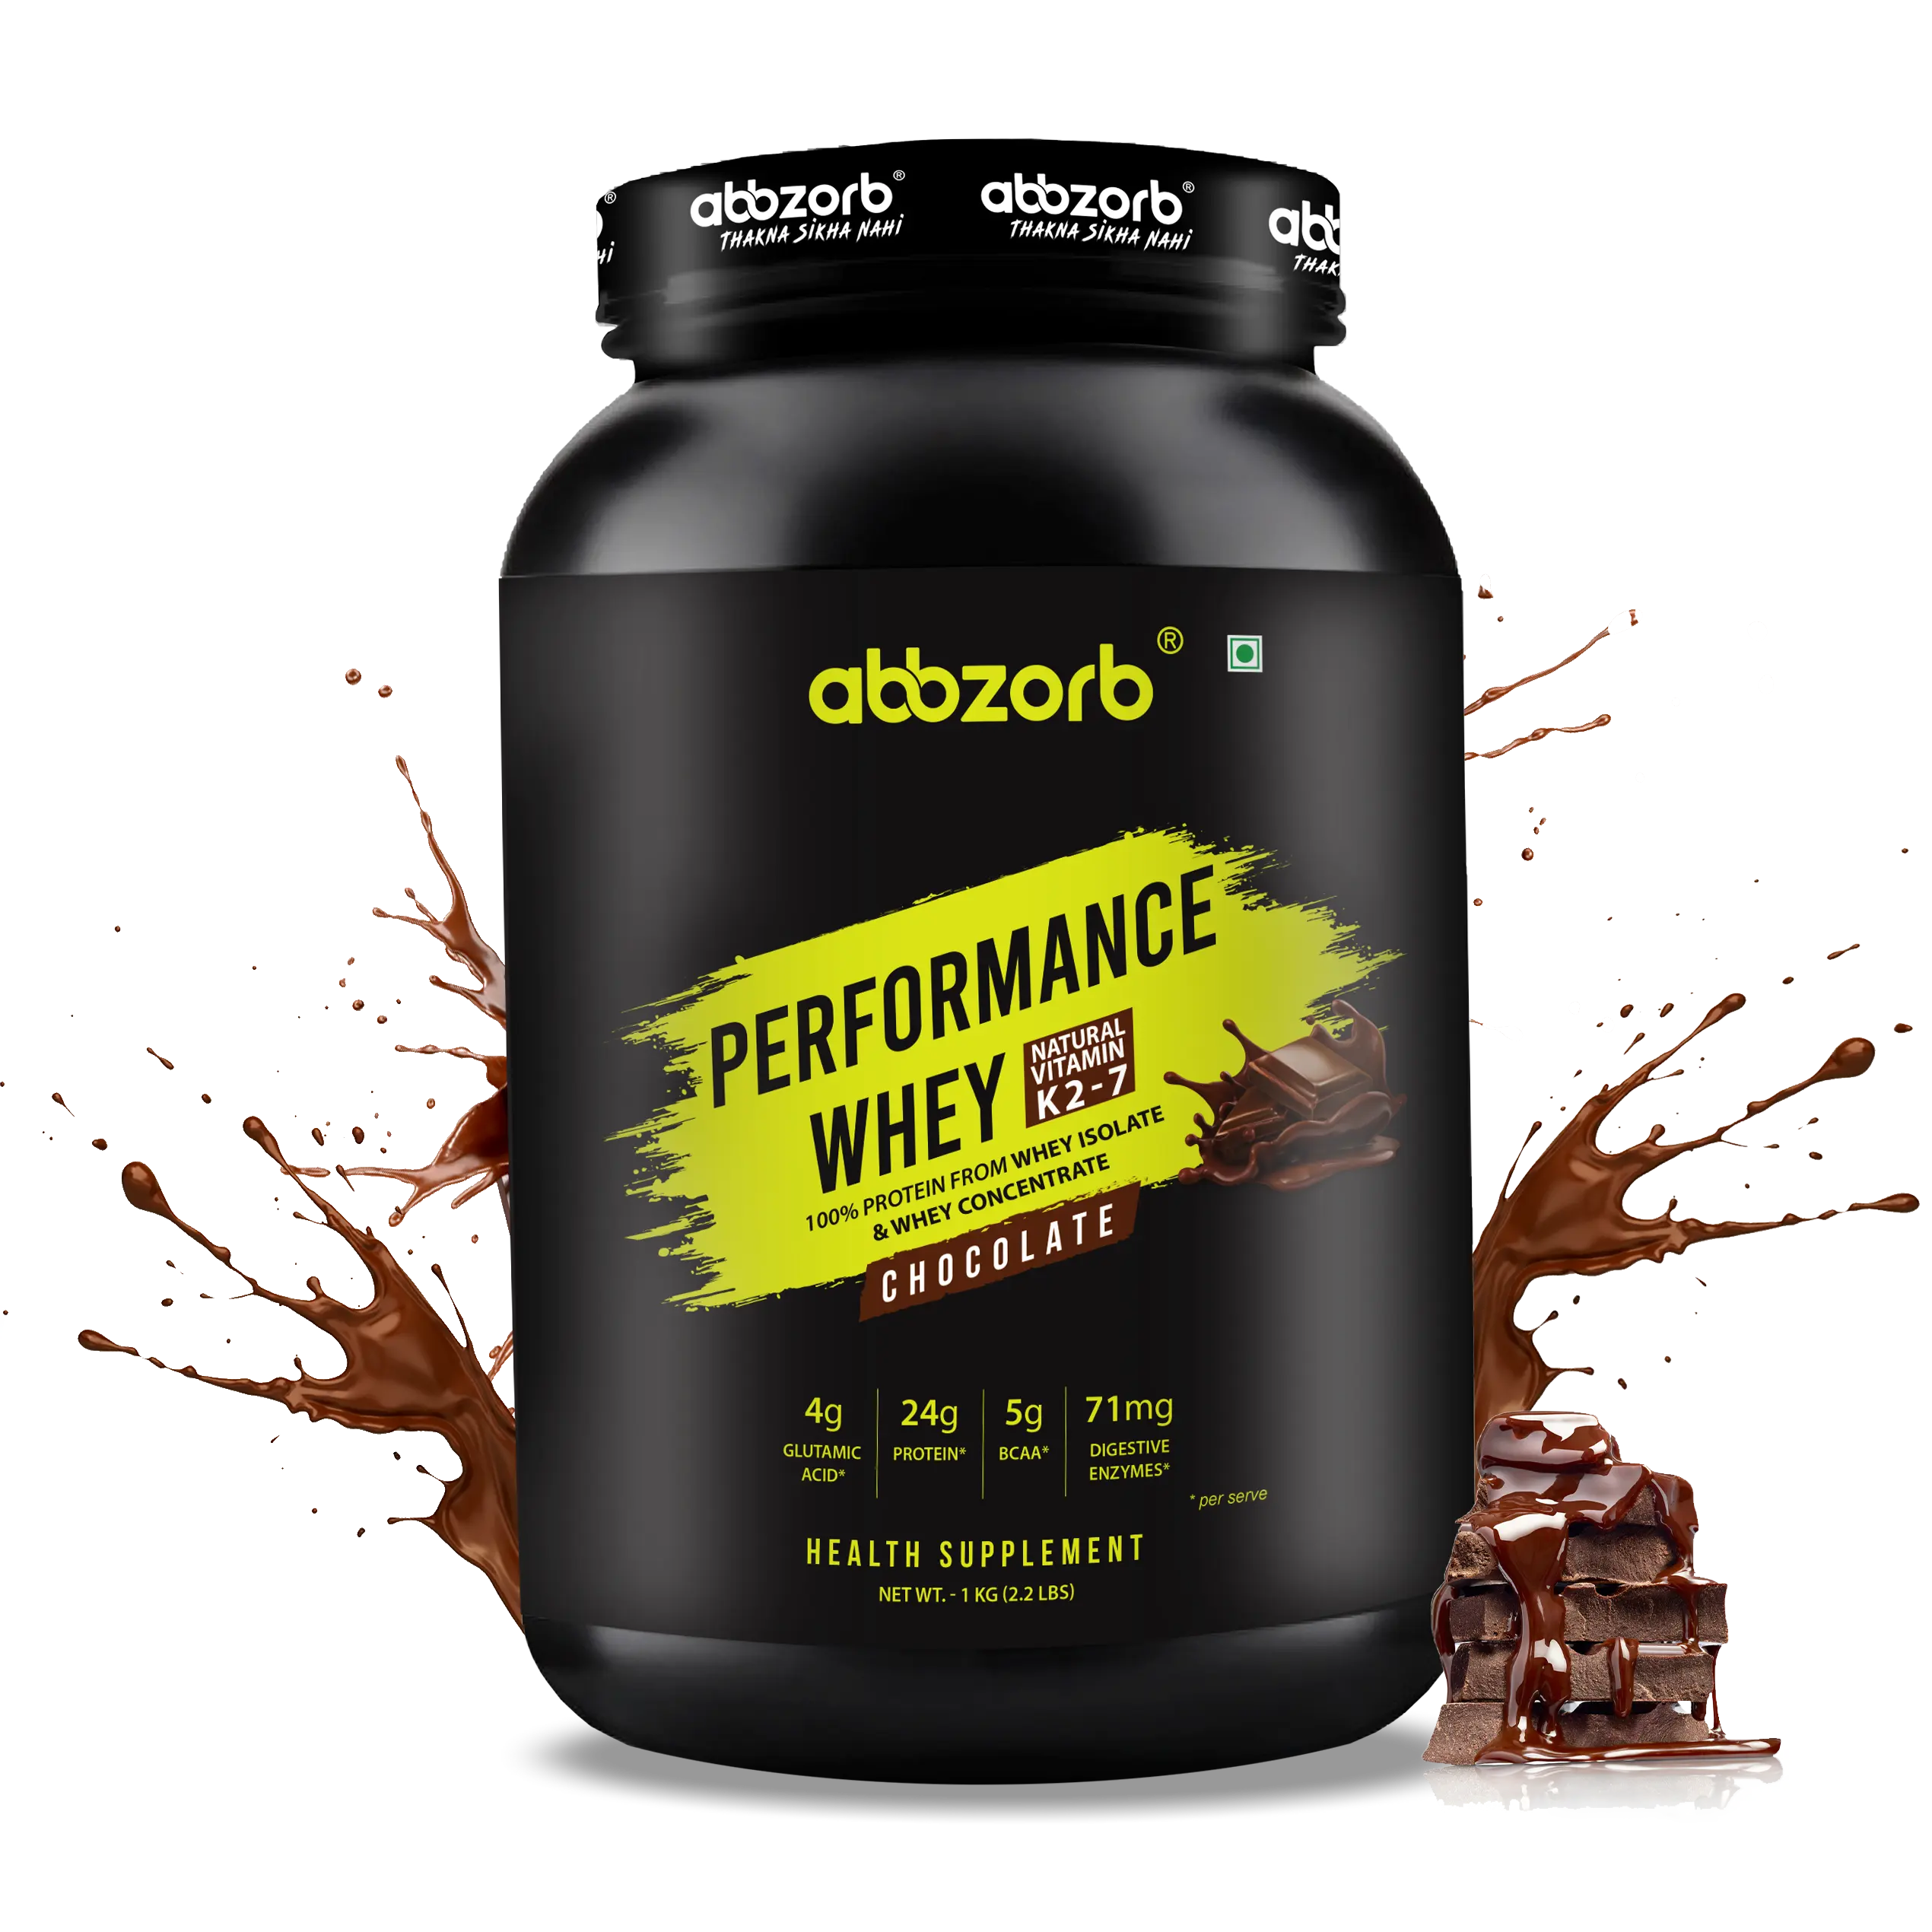 Wholesale Whey Powder Performance Women Men Gym Regular Basis Packaging Whey Protein Customized High India Raw Natural Protein